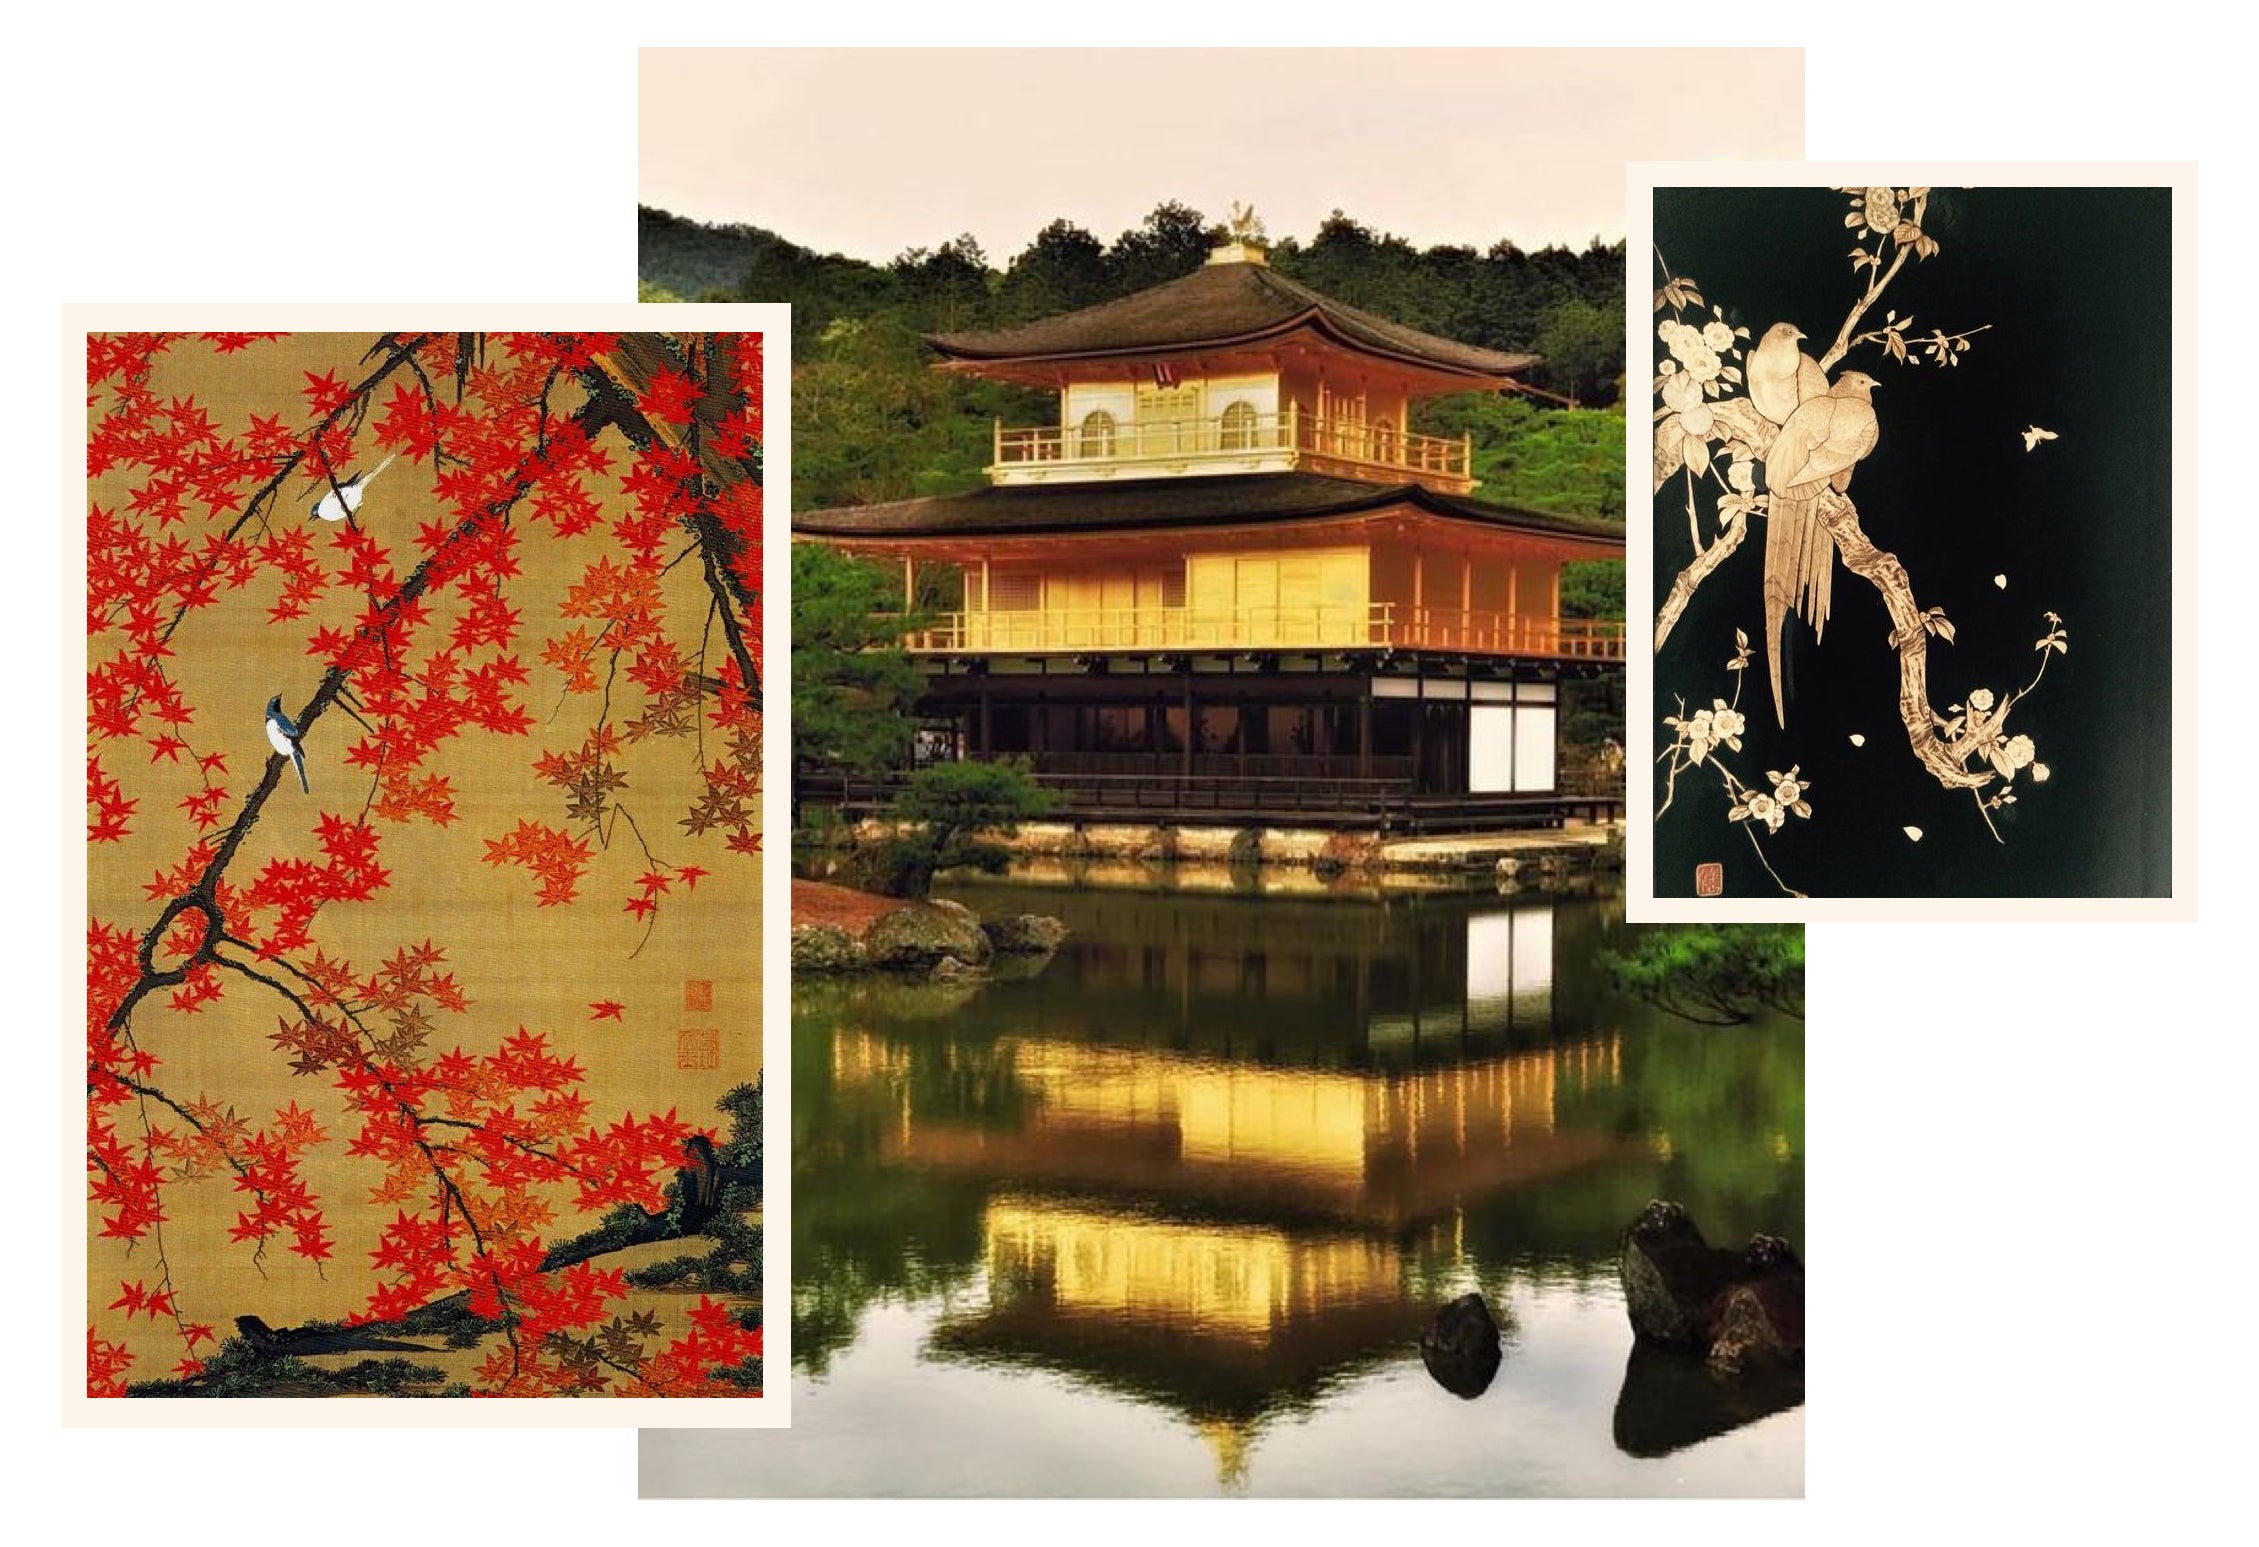 A picture of a zen temple, Japanese maple trees and gold lacquer work